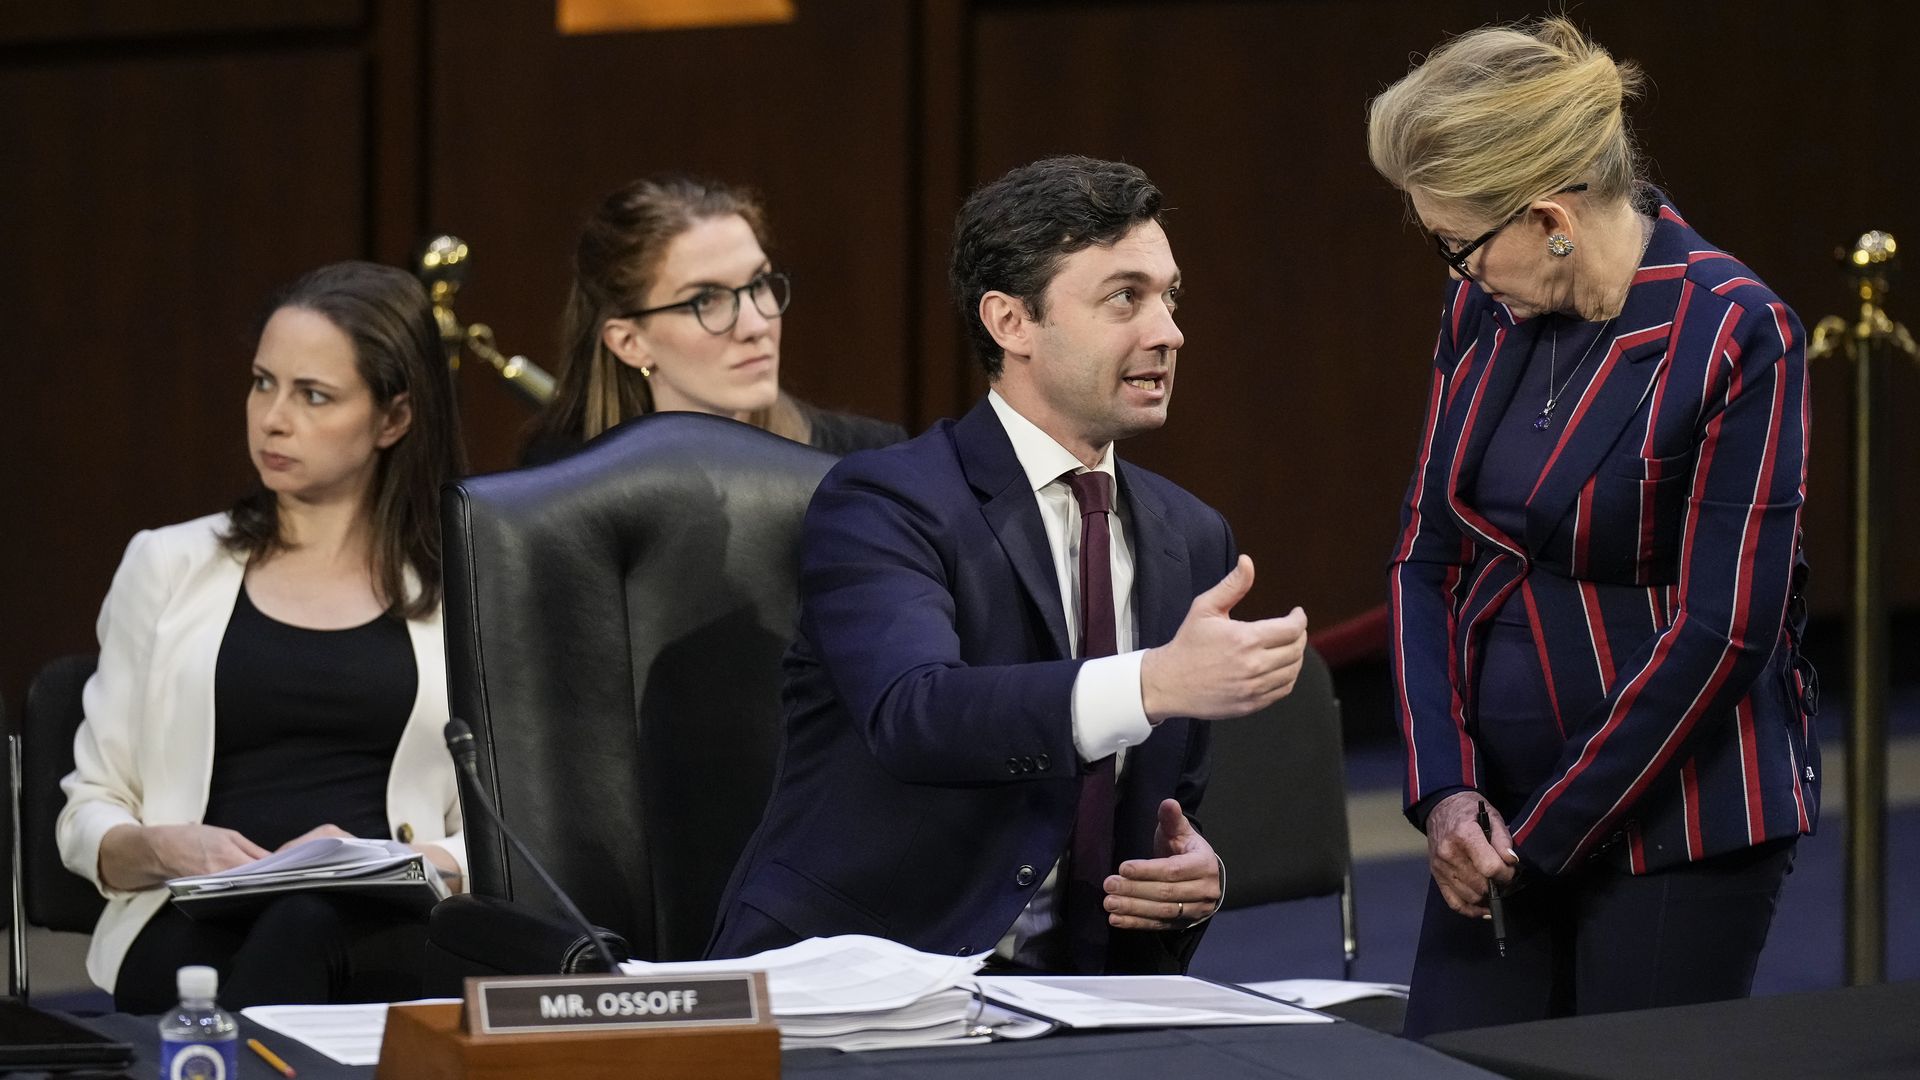 One person seated talks to another person standing during a congressional hearing